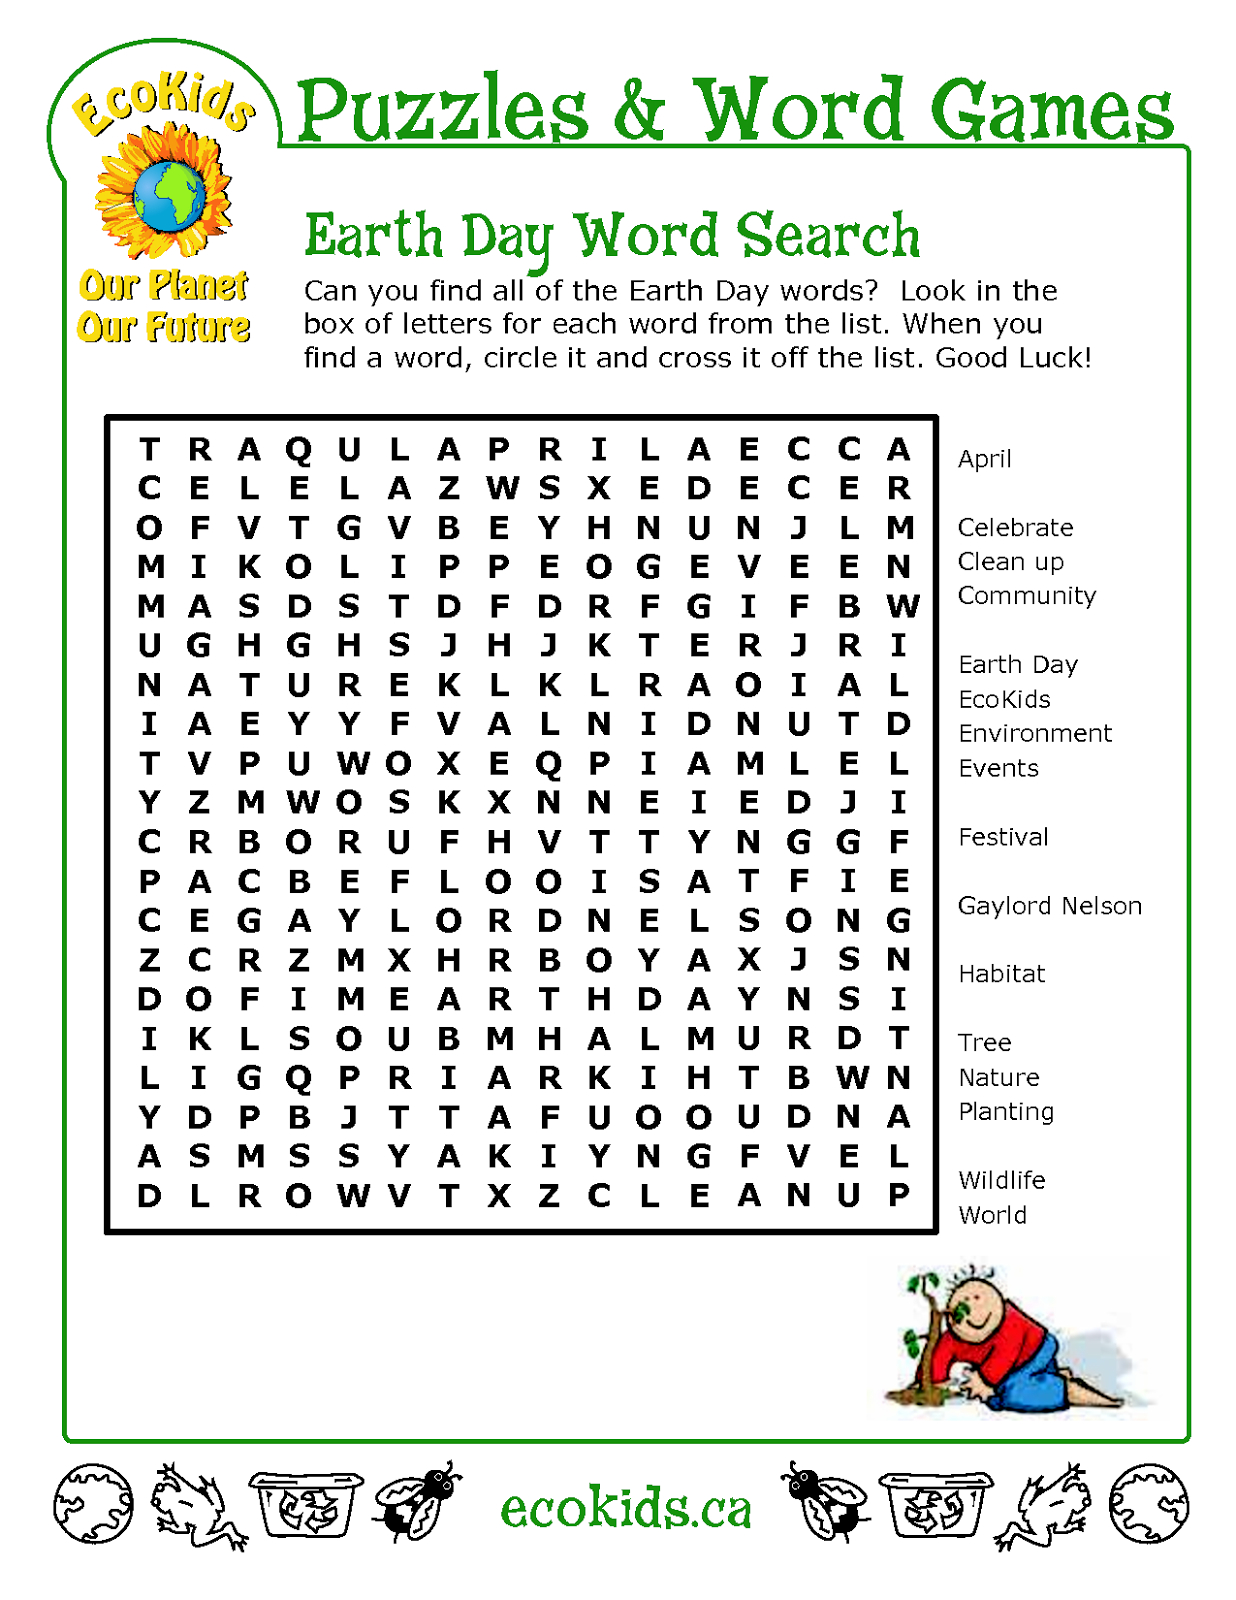 Earth Day Word Search Printable: Top 10 Earth Day Word